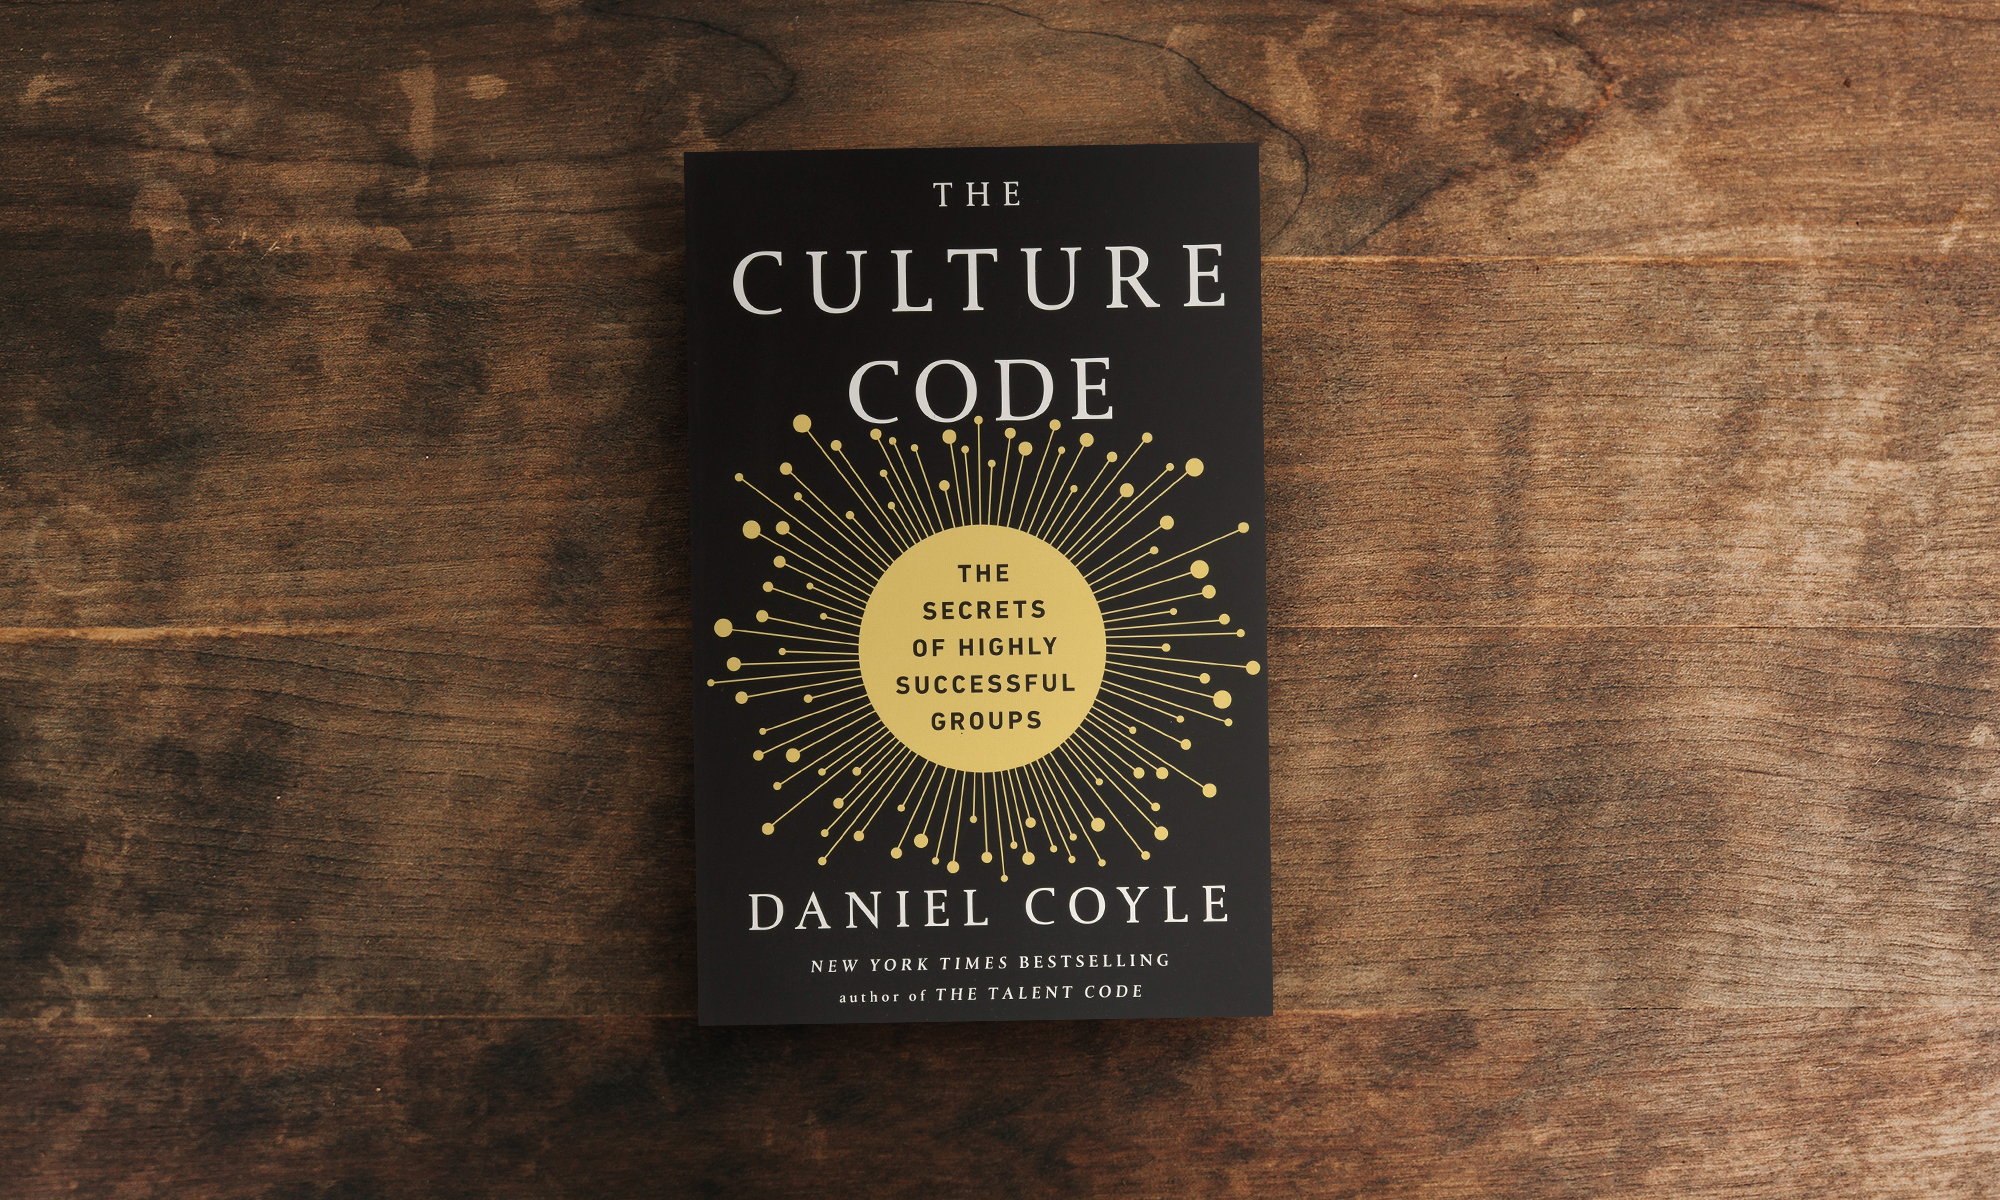 Cover of Daniel Coyle's book "The Culure Code"